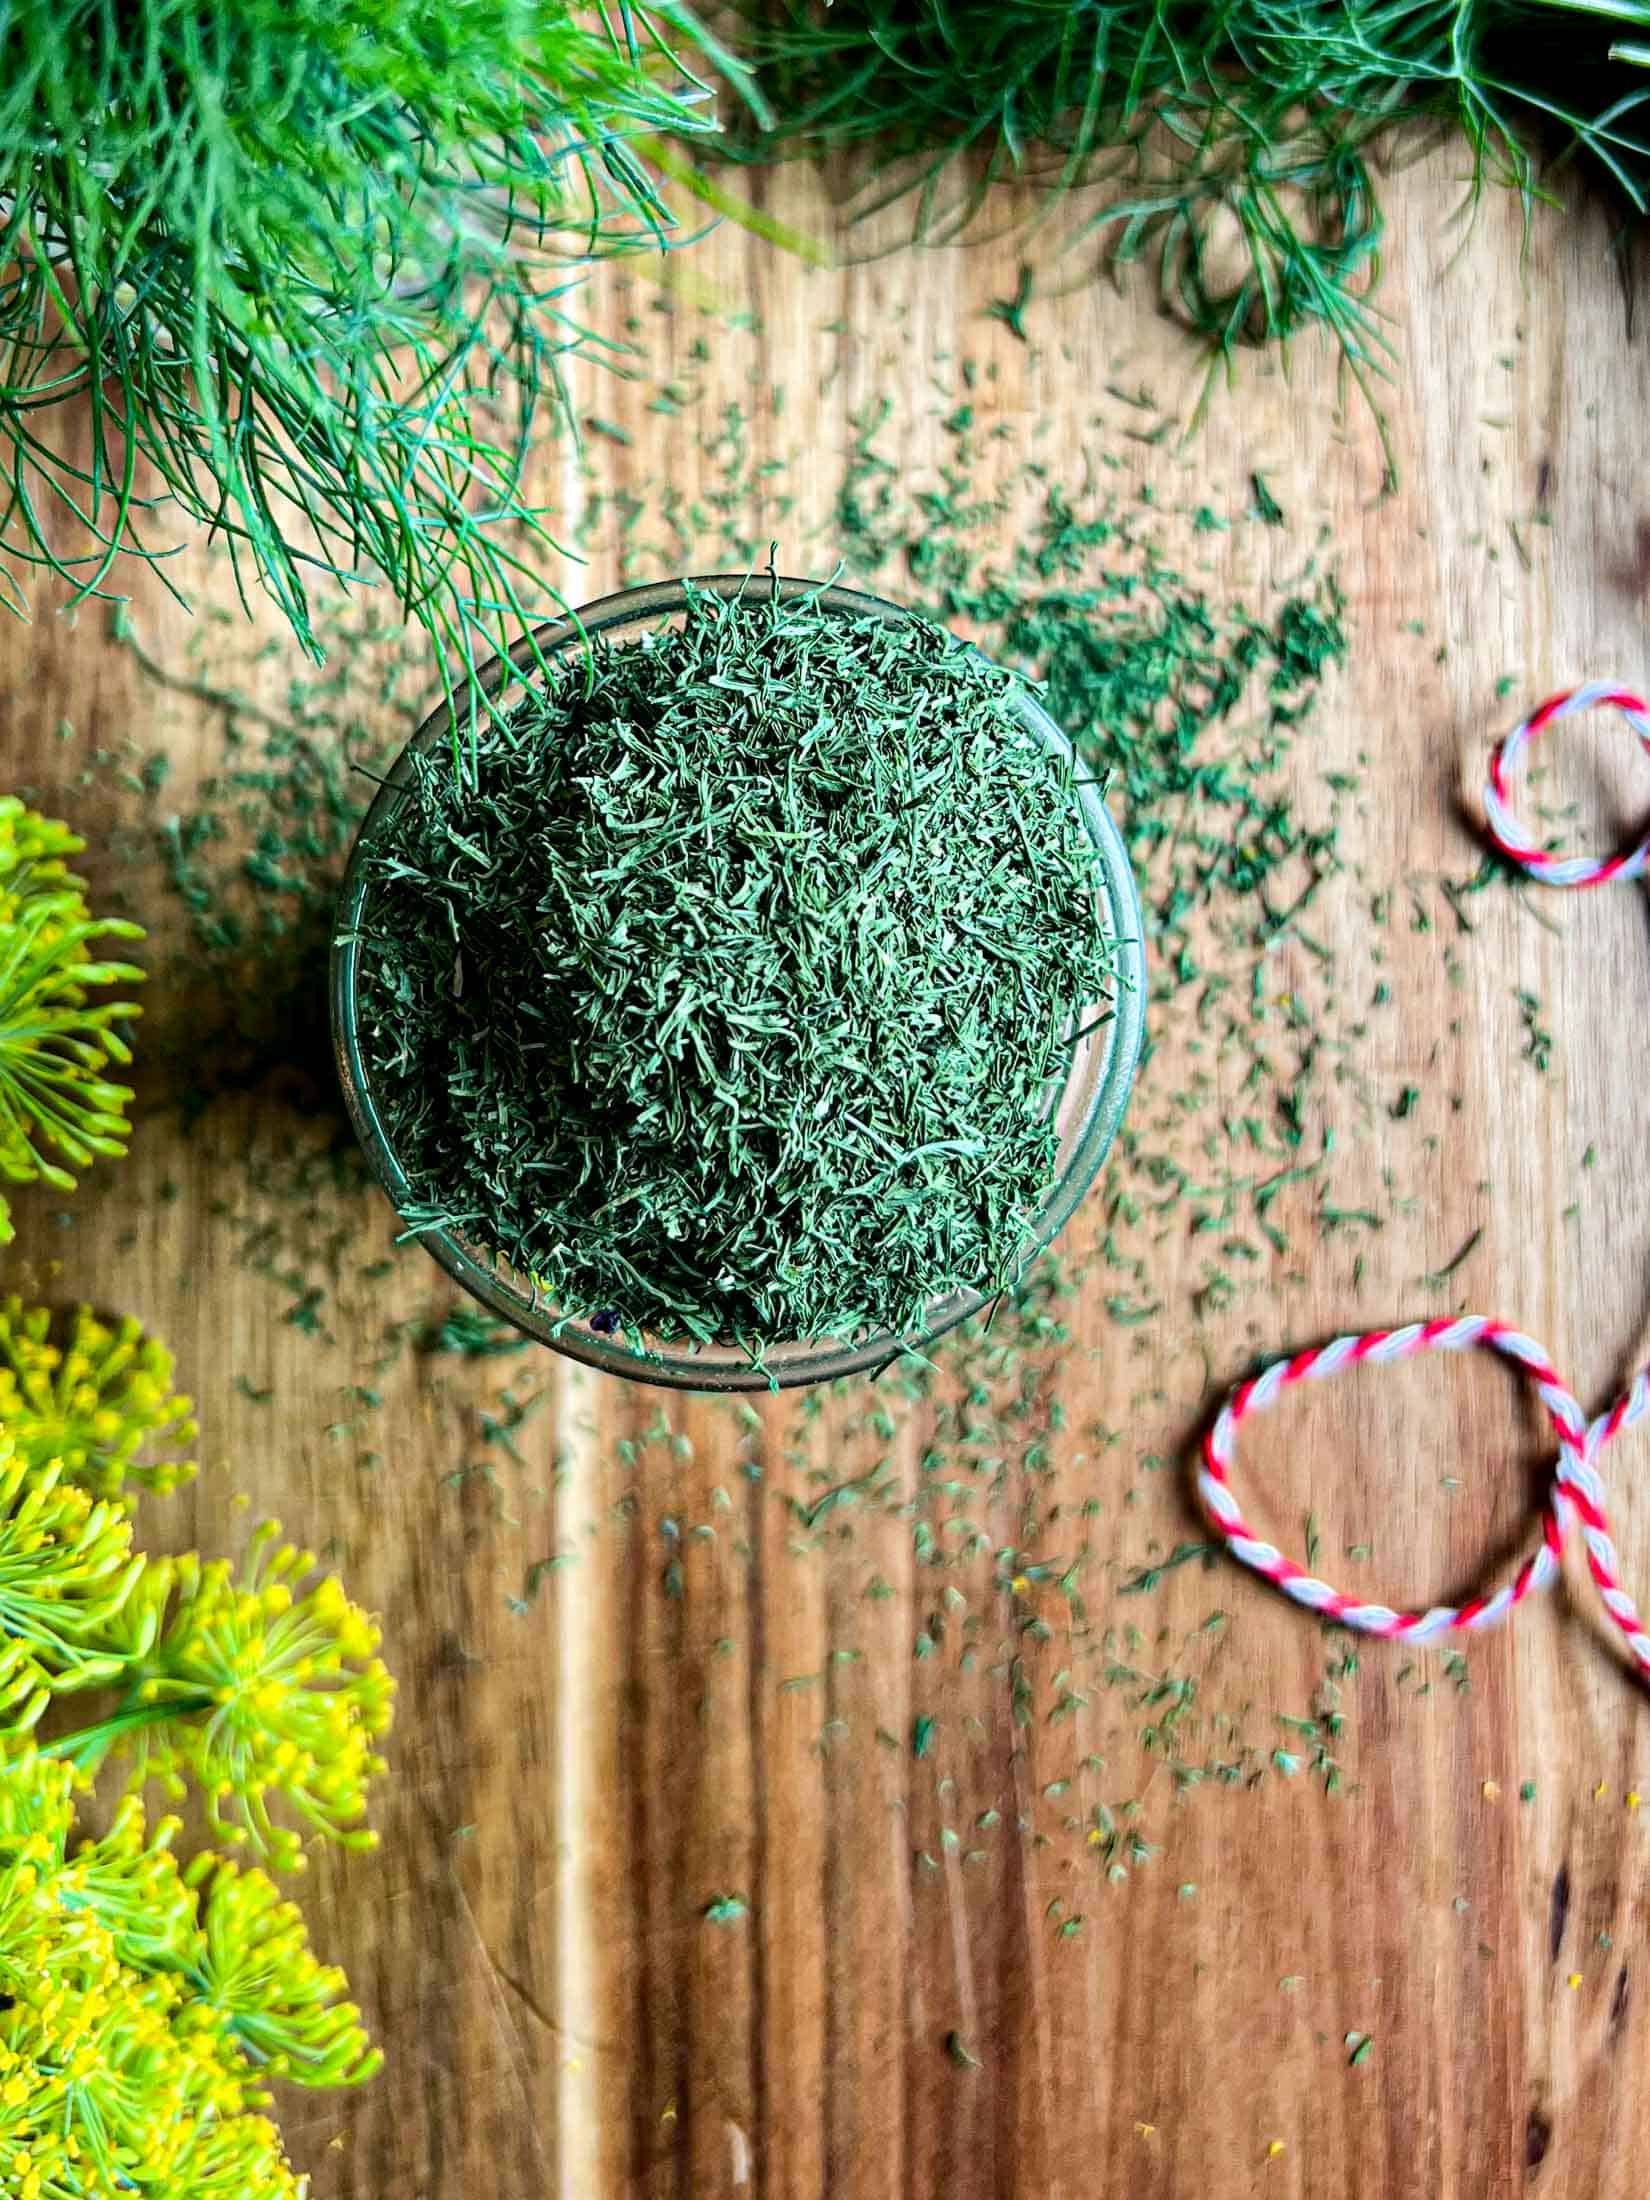 A closeup of dried dill flakes with dill flowers and fresh dill surrounding it.